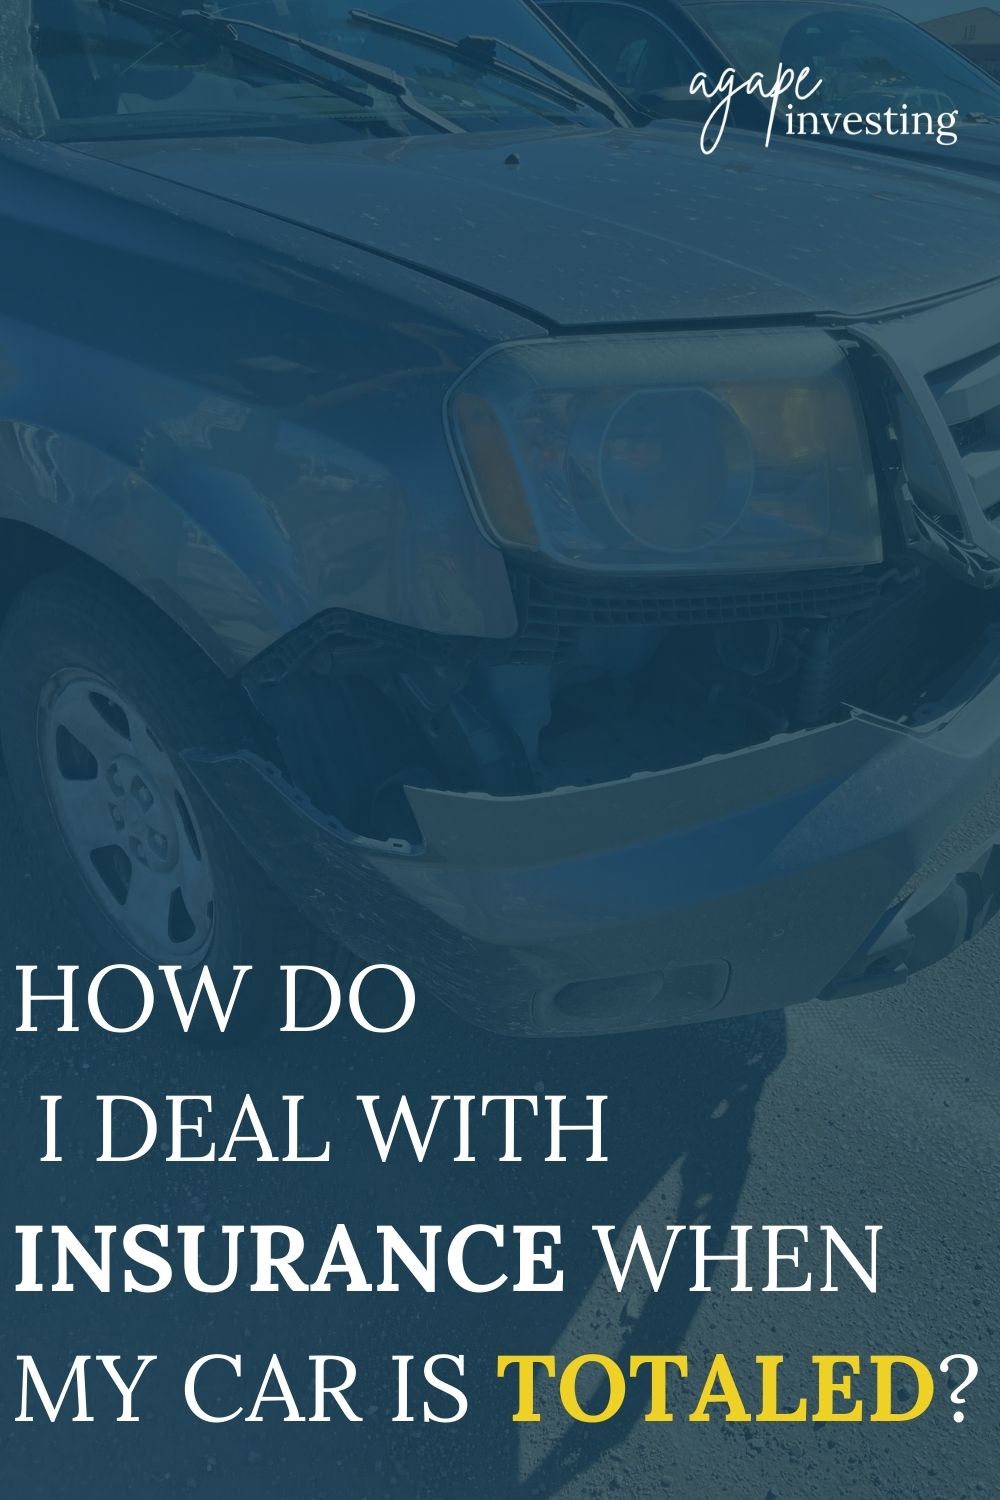  Was your car totaled in a recent accident? Learn how to deal with insurance and what happens when your car gets totaled in a car accident. 